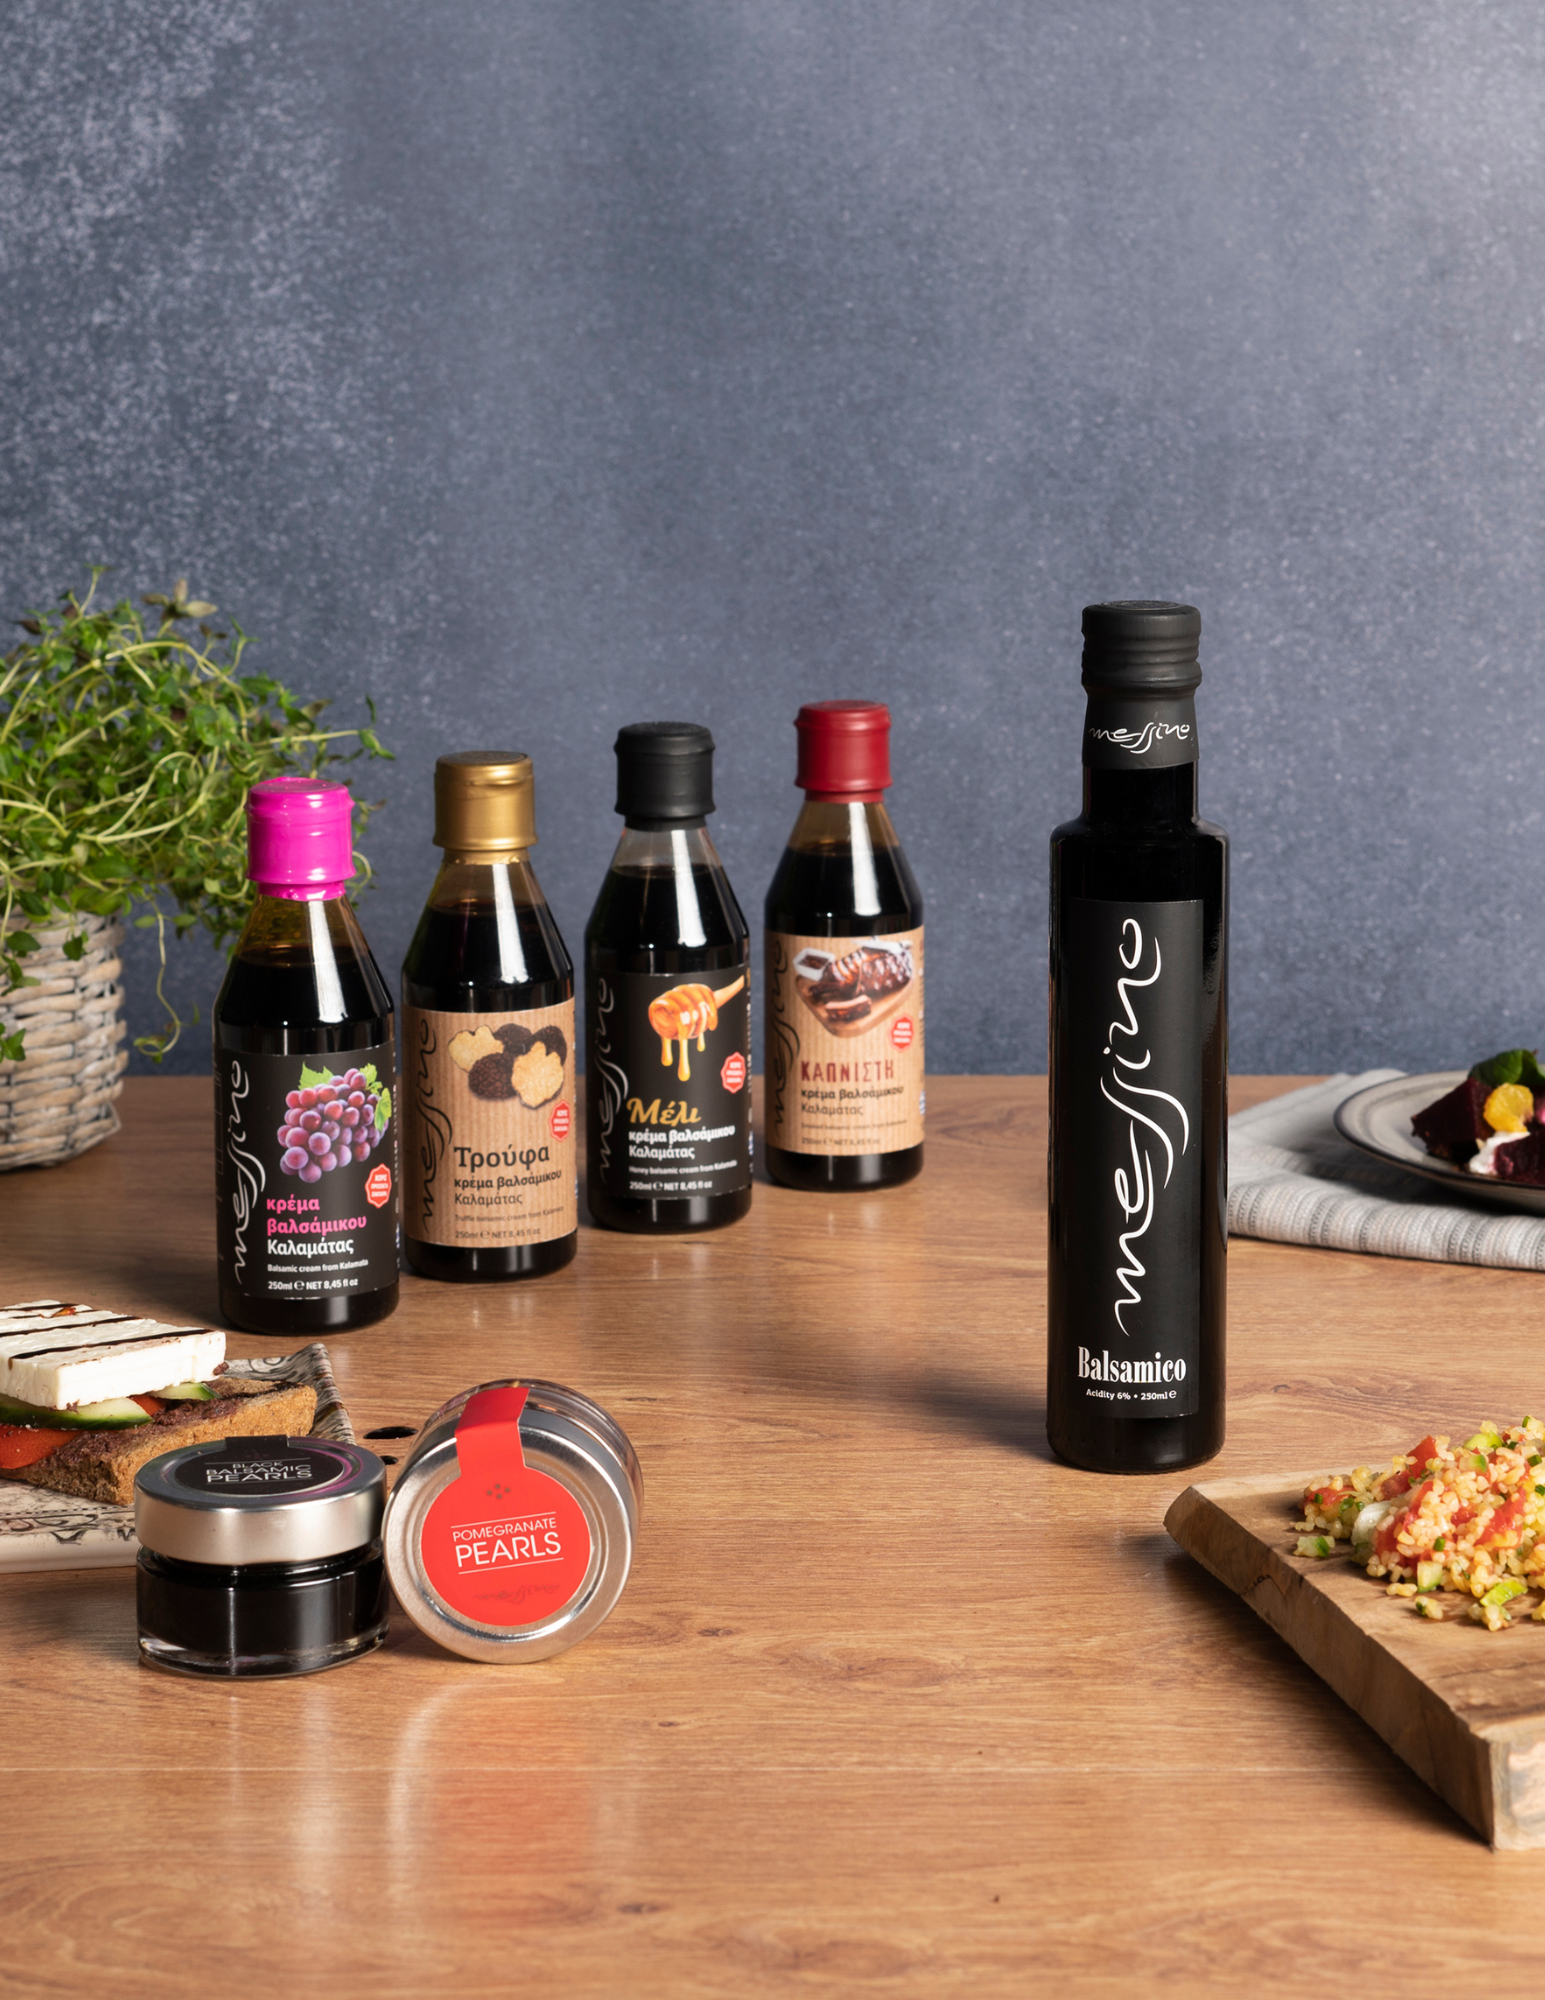 A collection of Messino vinegar products including balsamic vinegar, four flavors of glazes and two flavors of balsamic pearls